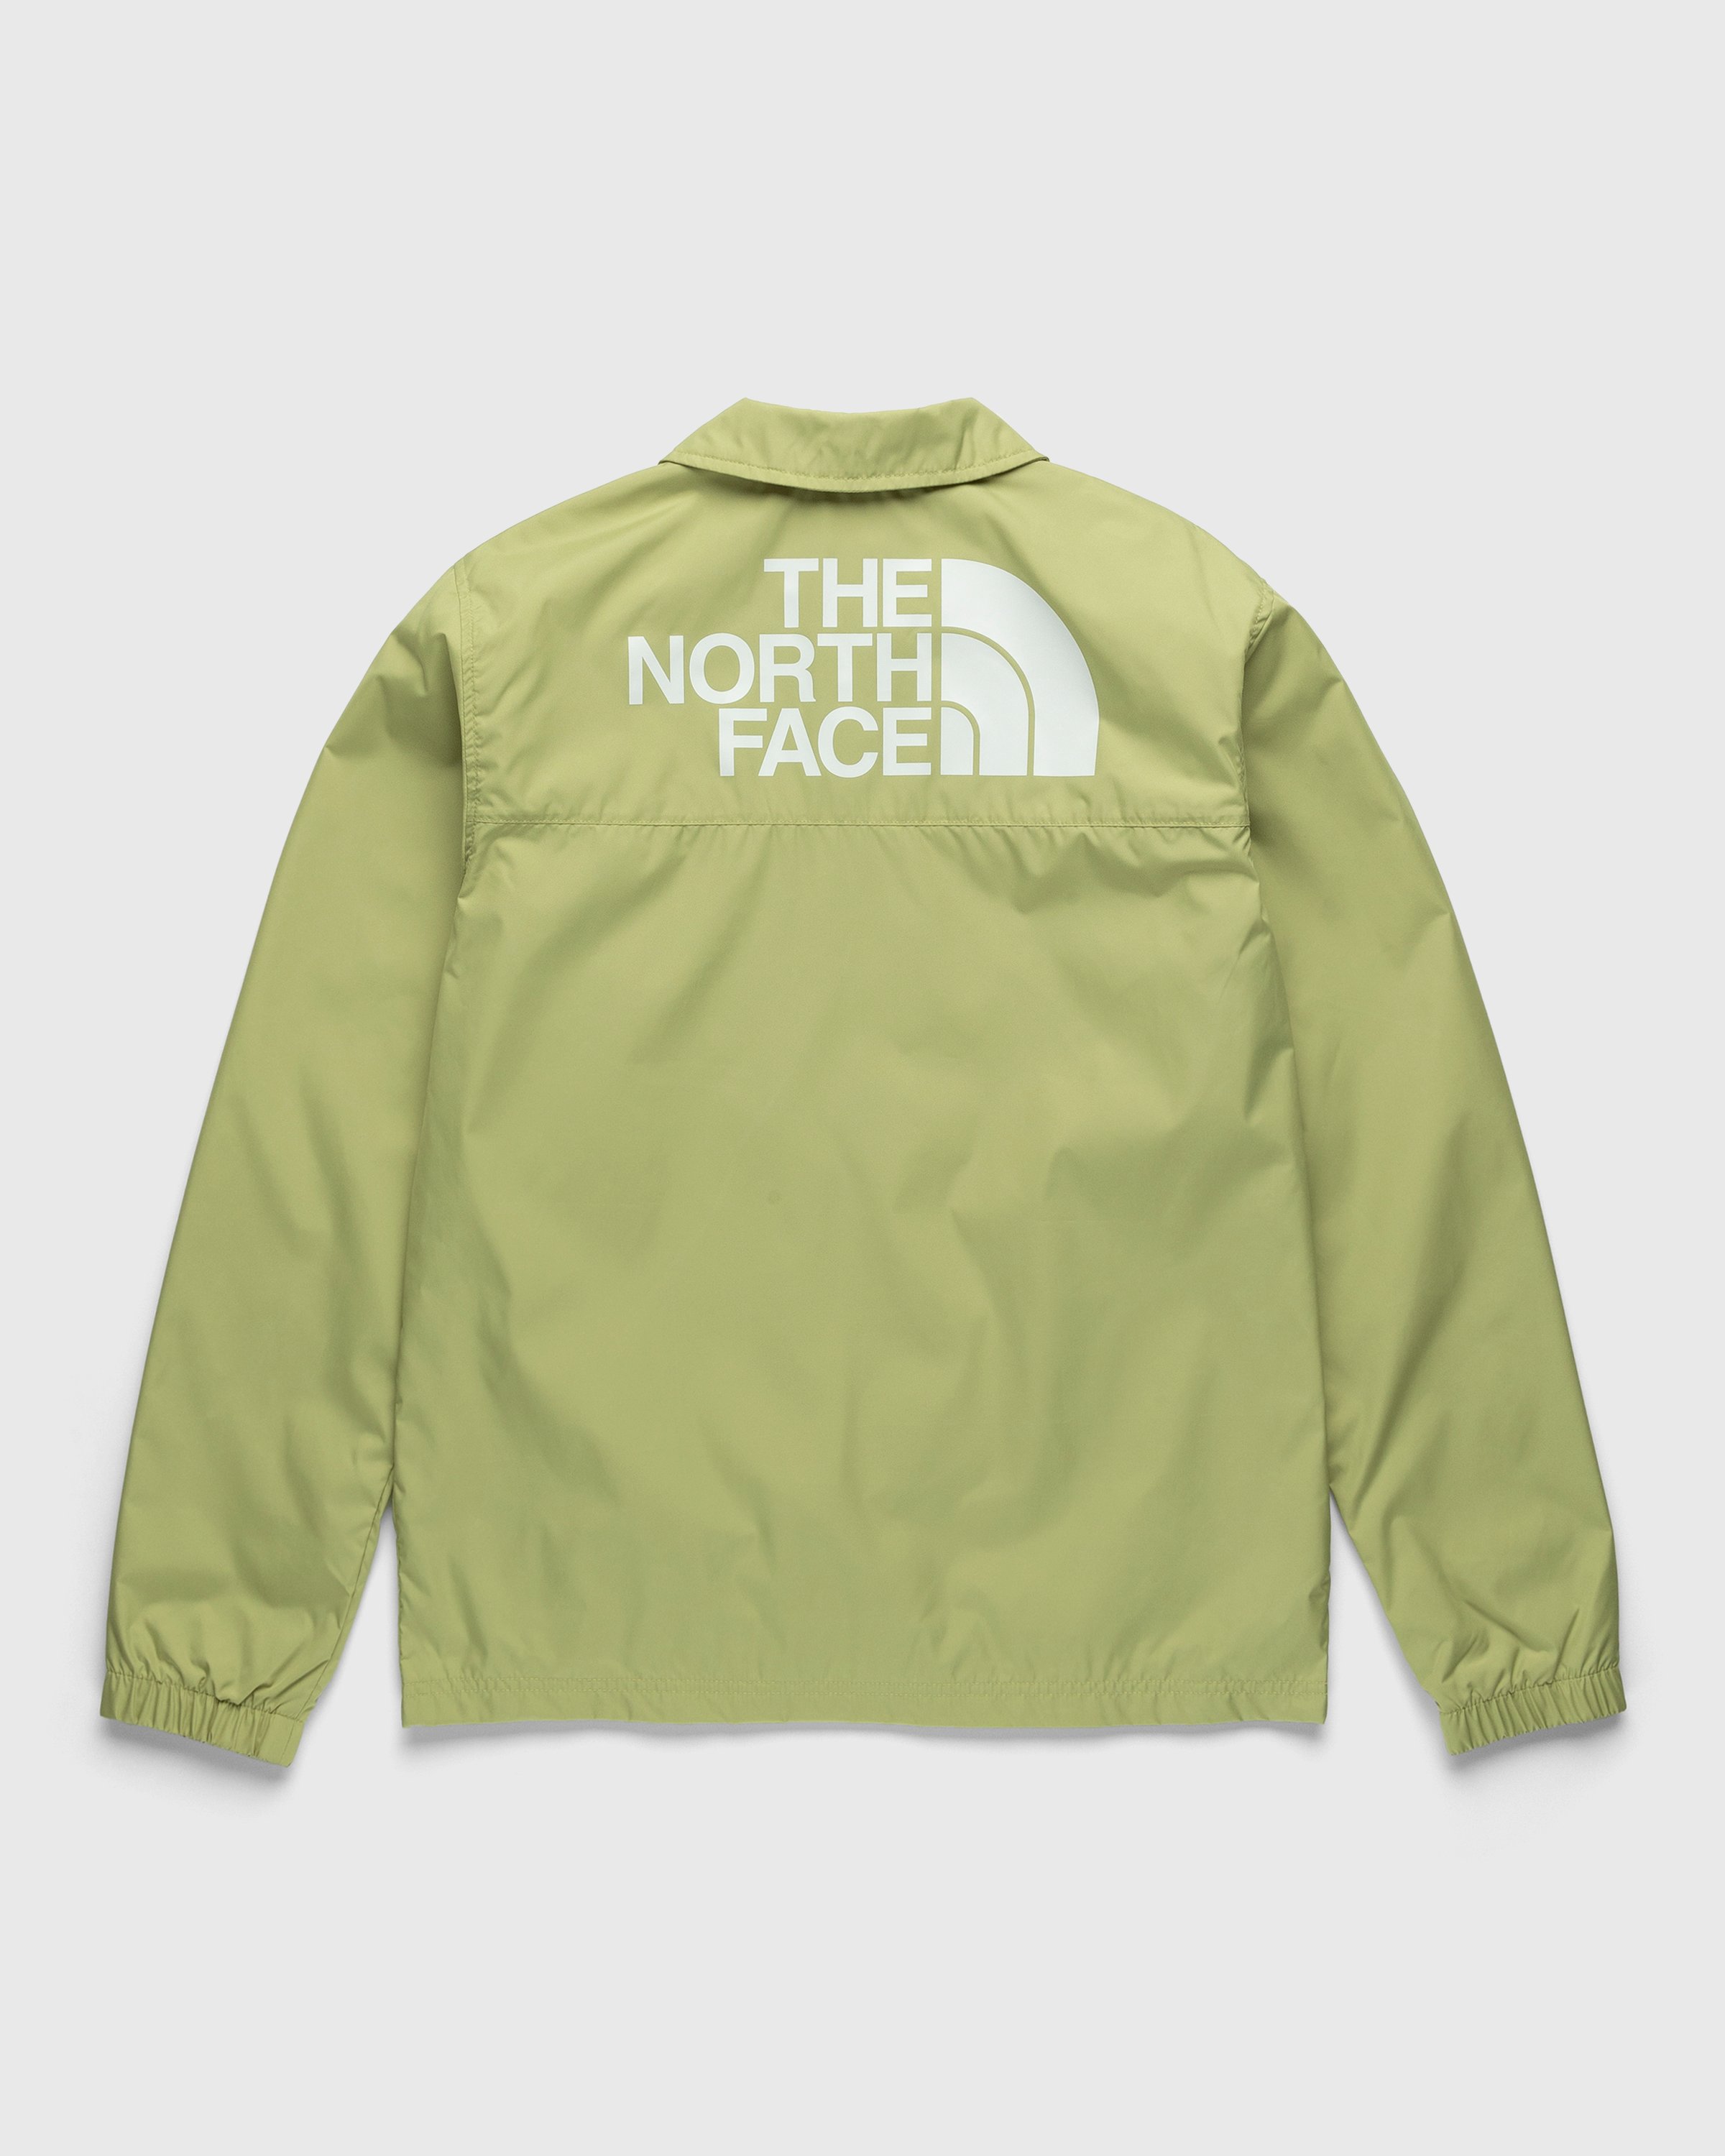 The North Face - Cyclone Coaches Jacket Weeping Willow - Clothing - Green - Image 2